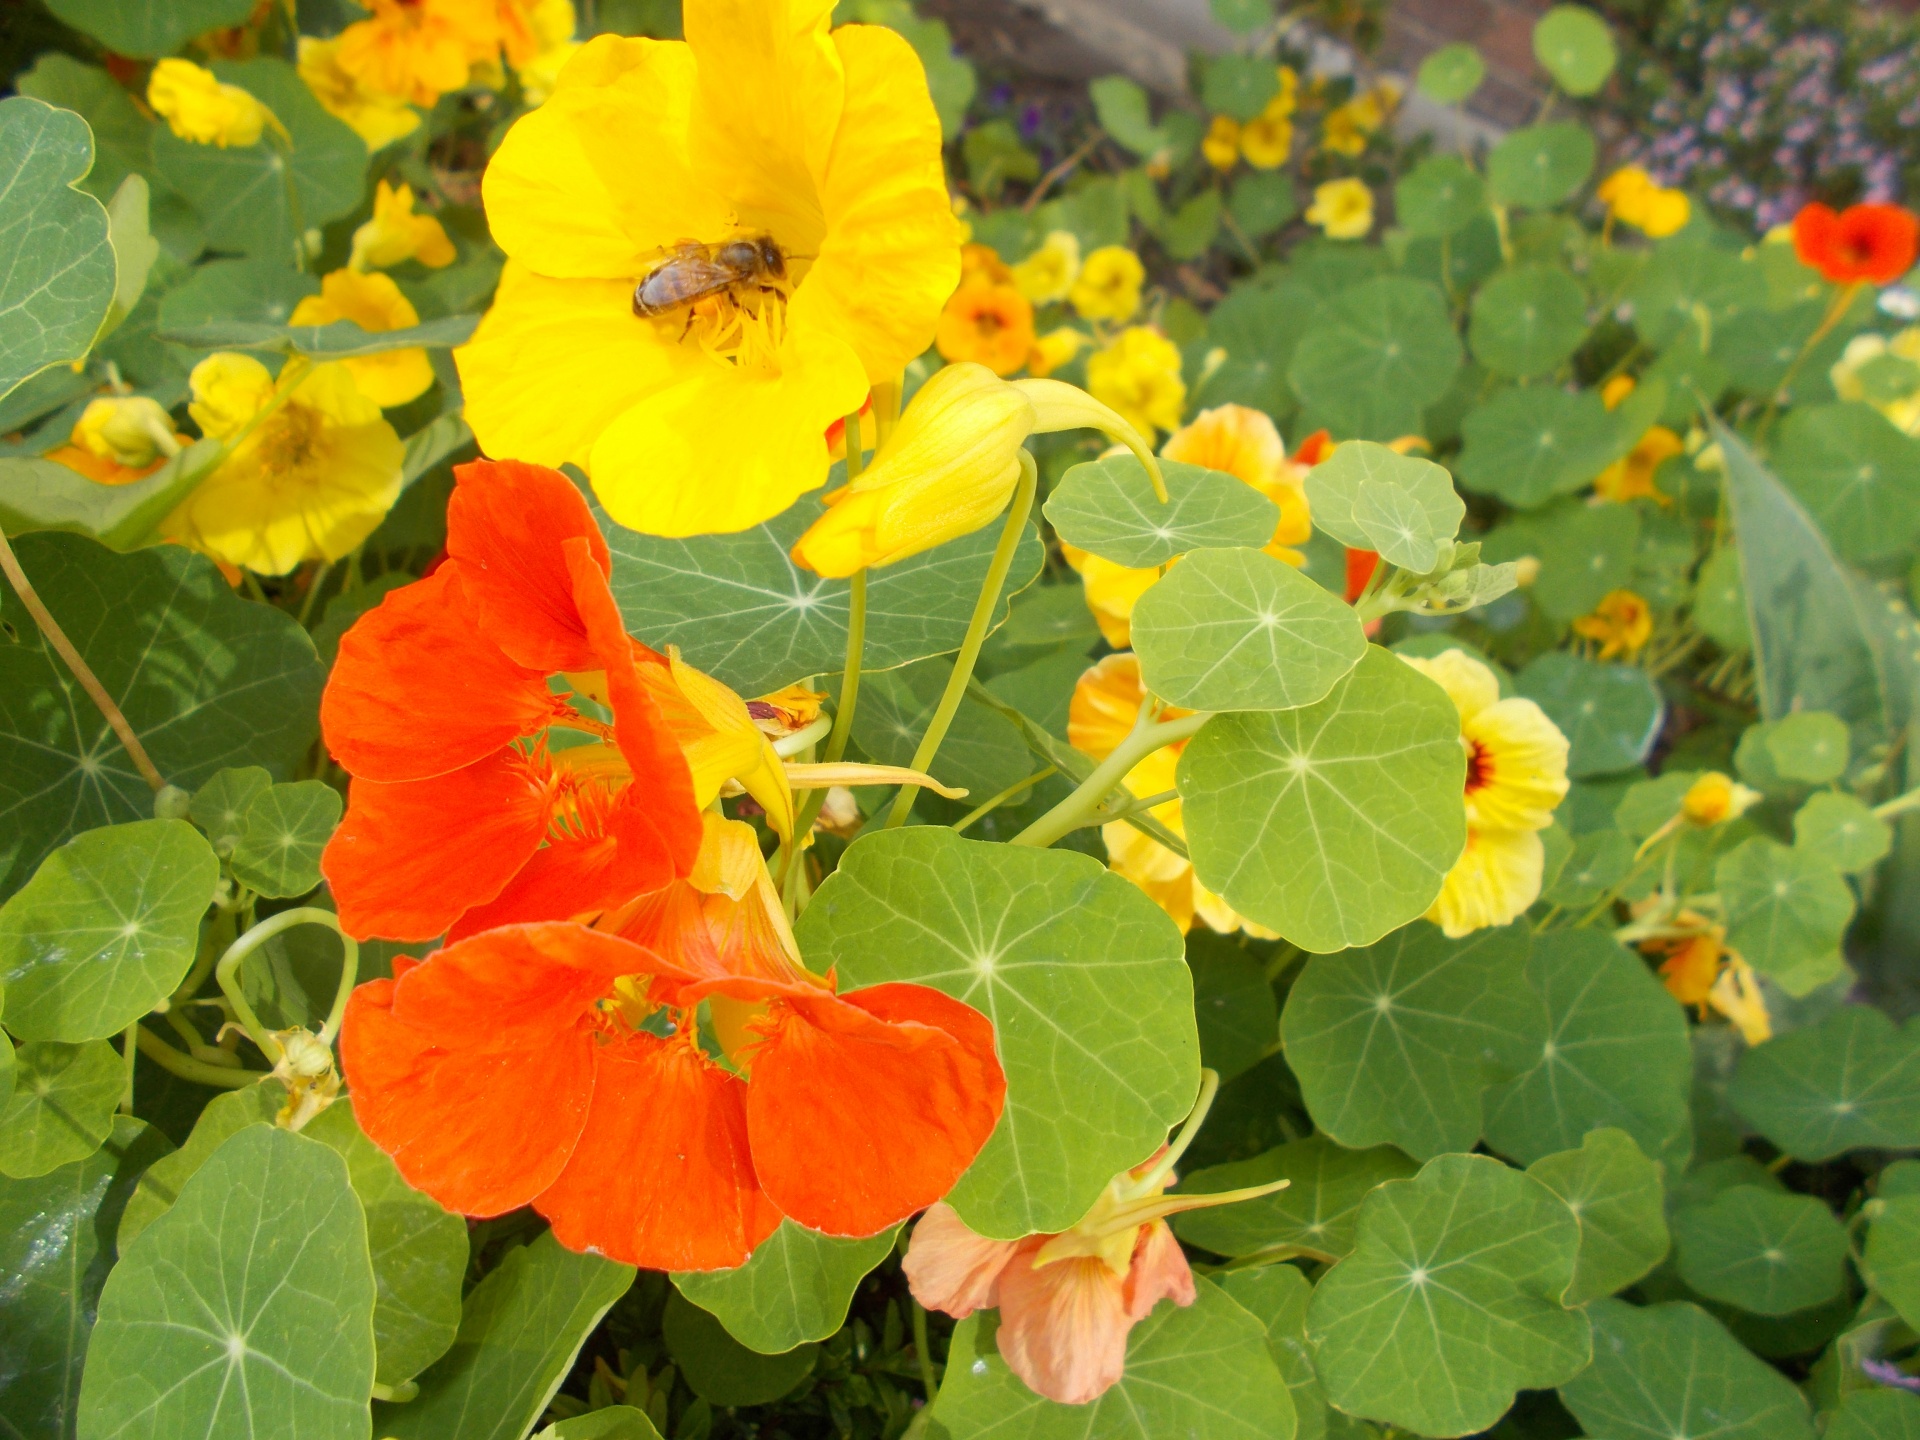 Flowers in my garden, orange and yellow nasturtiums and white seaside daisies and a bee